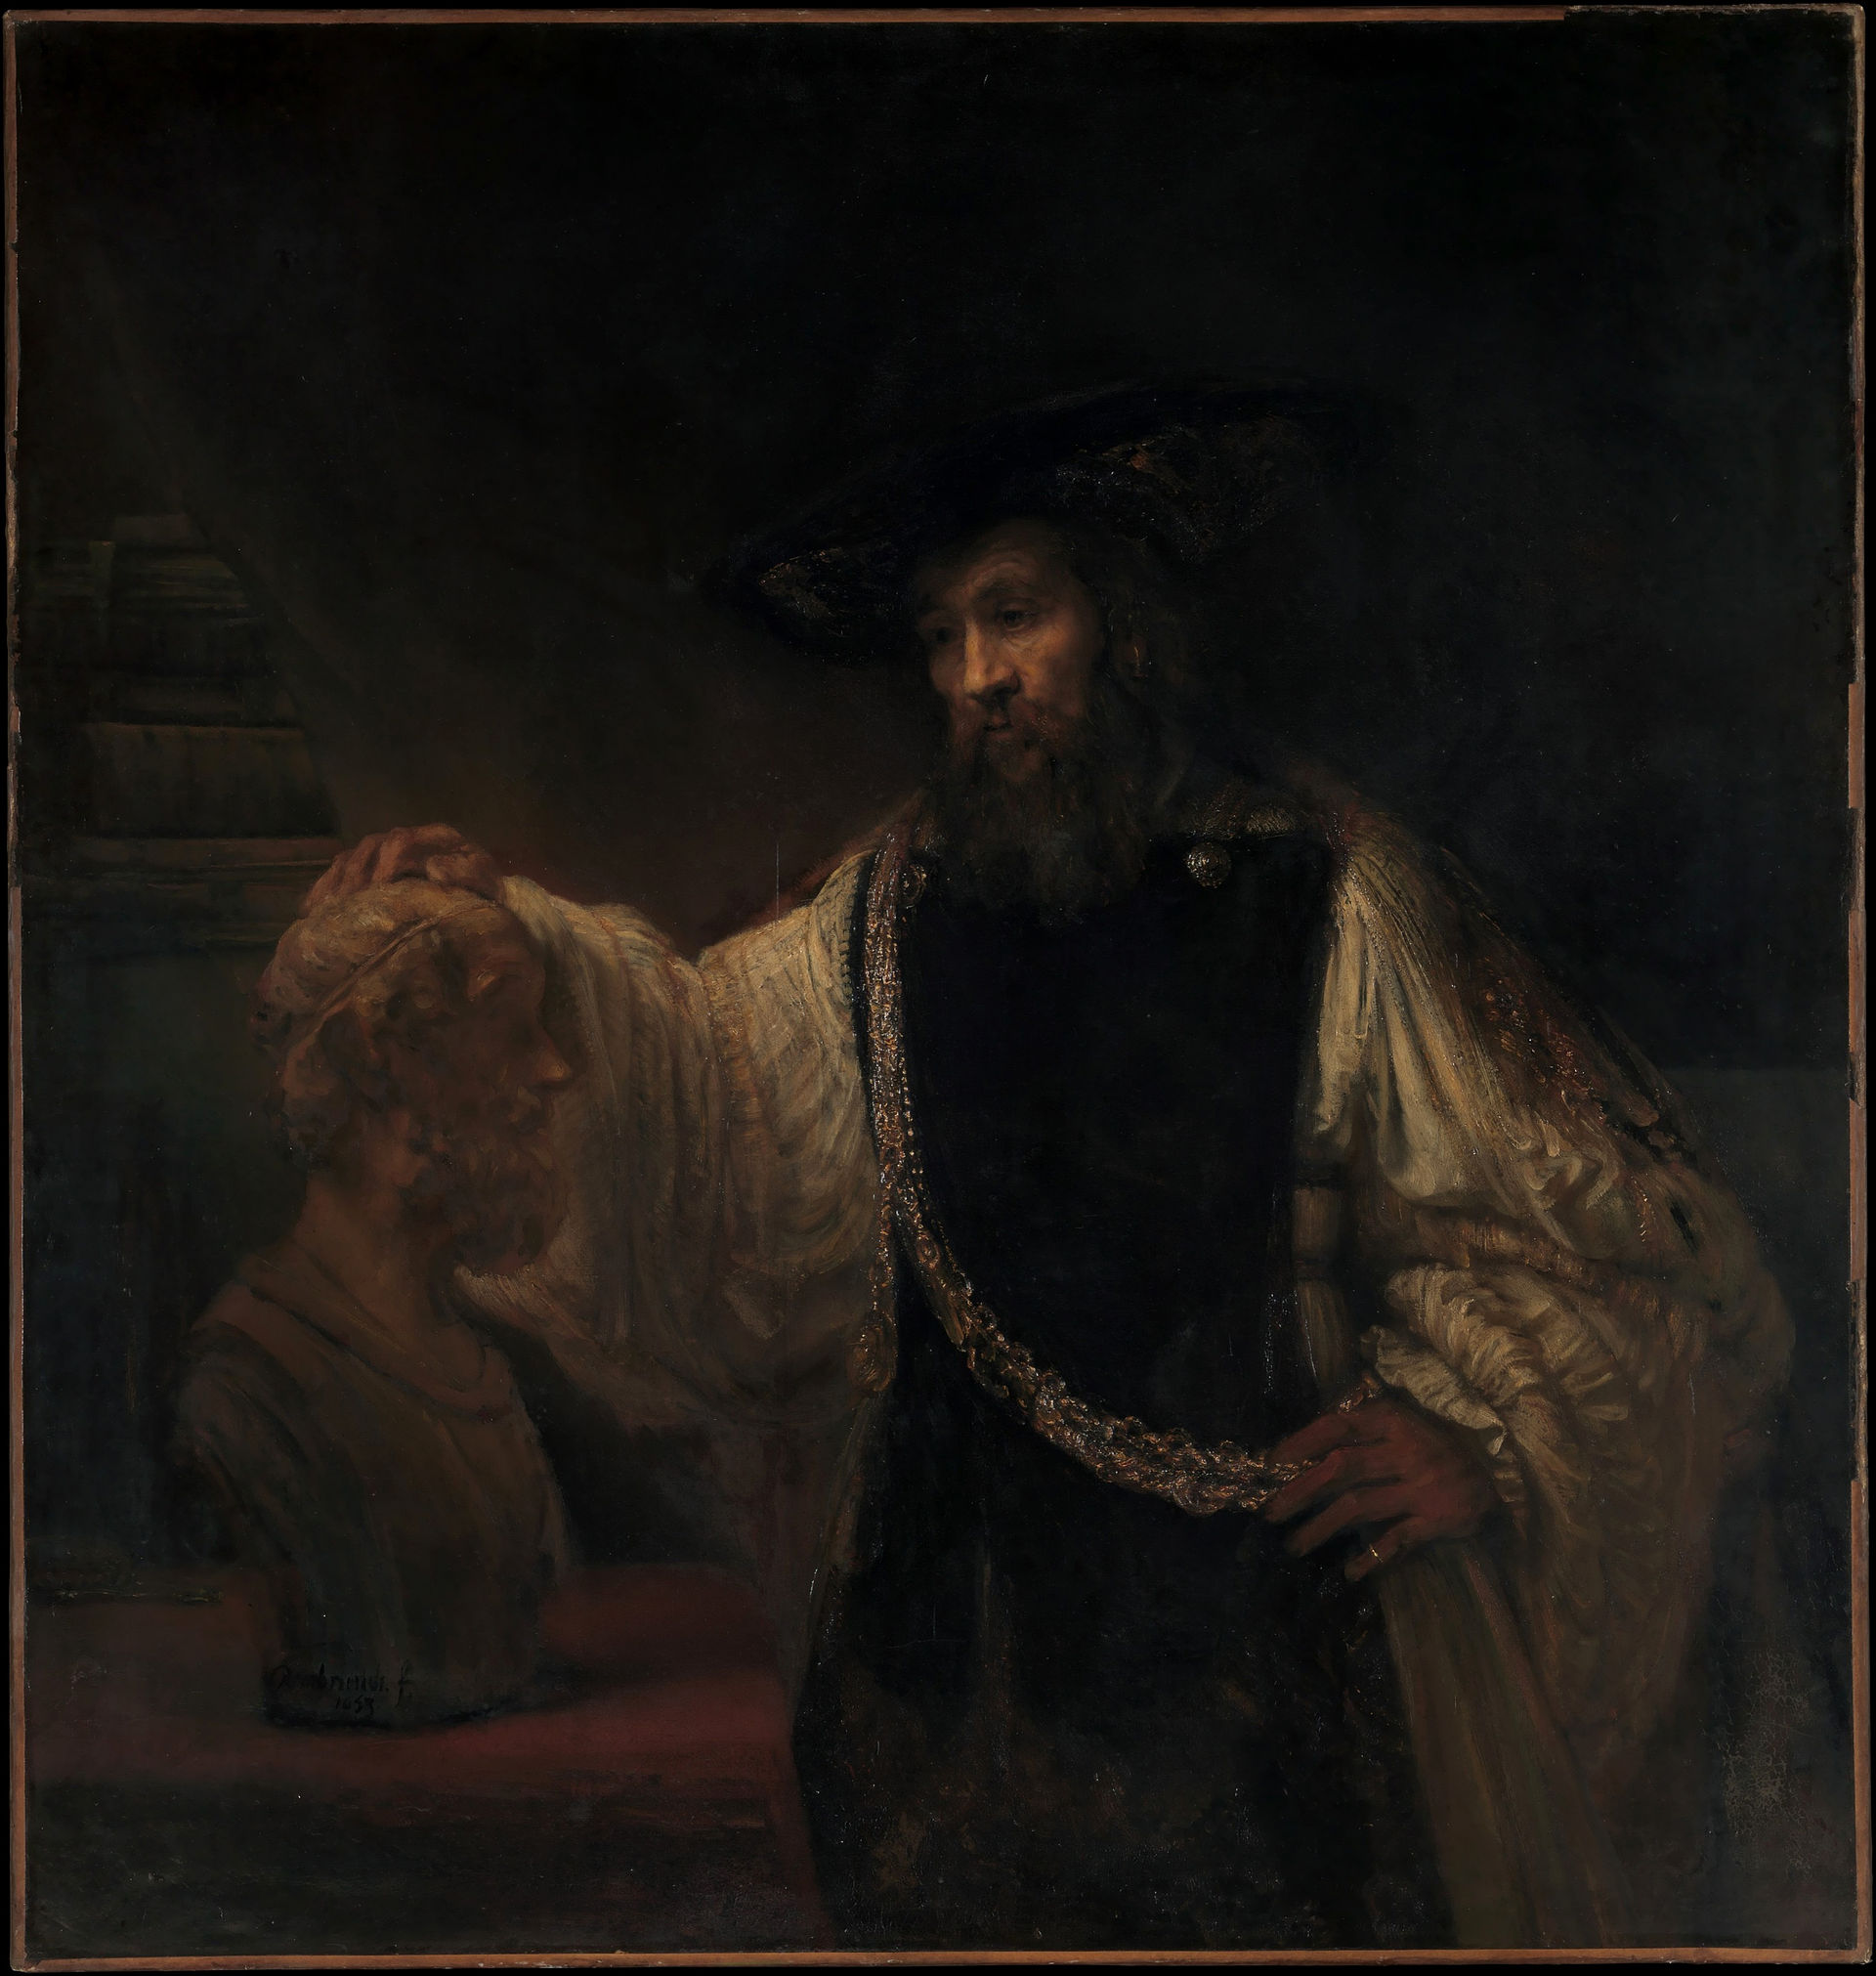 Rembrandt - The Dutch Painter and His Famous Paintings